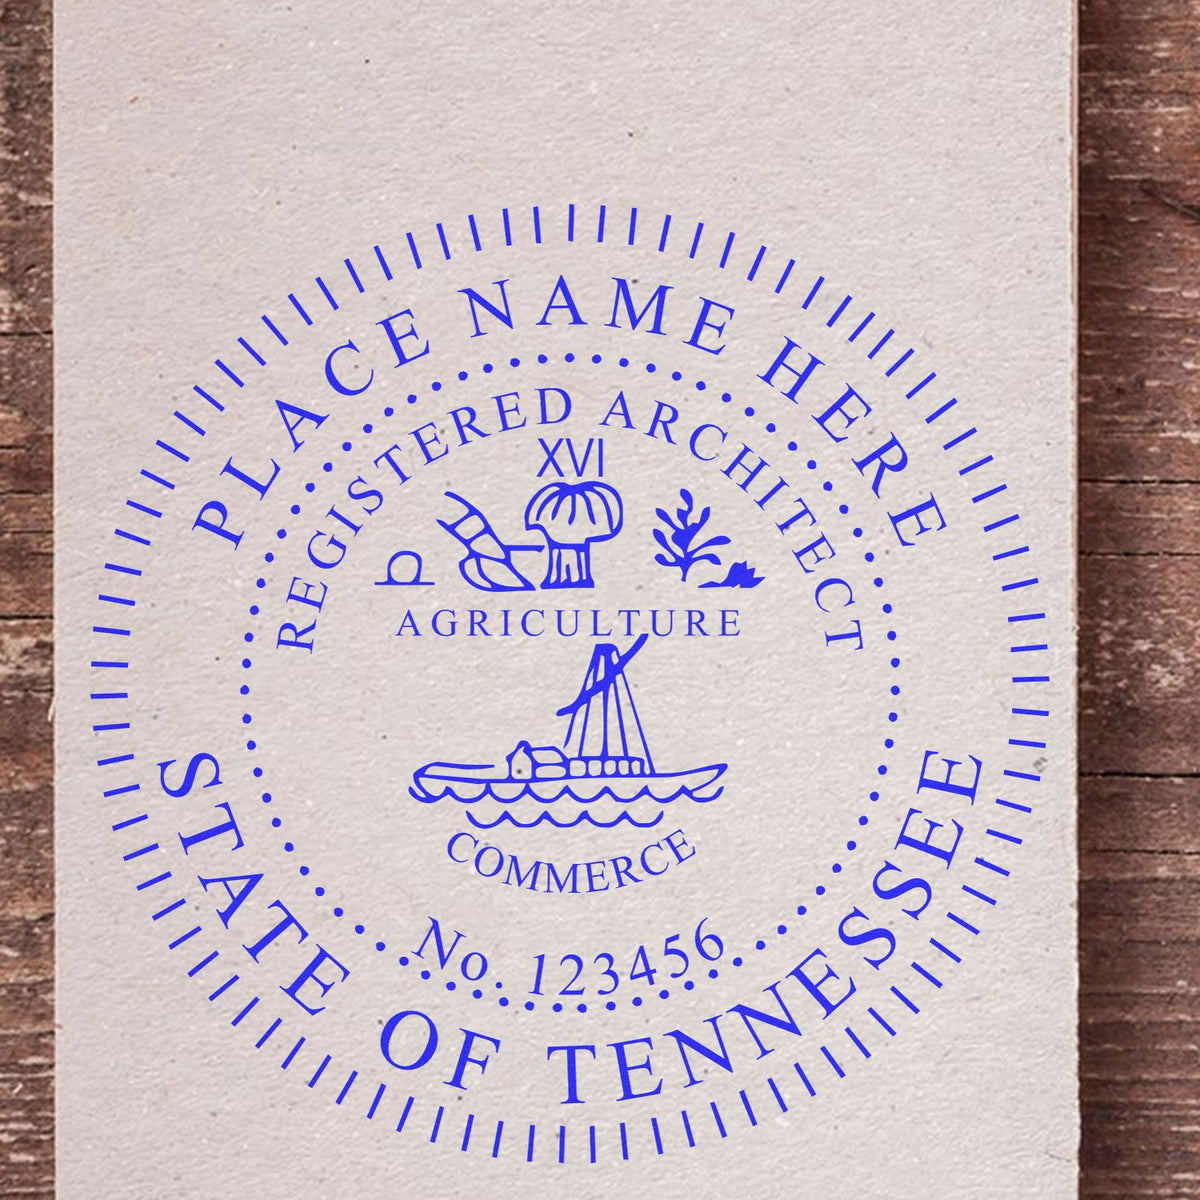 Slim Pre-Inked Tennessee Architect Seal Stamp in use photo showing a stamped imprint of the Slim Pre-Inked Tennessee Architect Seal Stamp